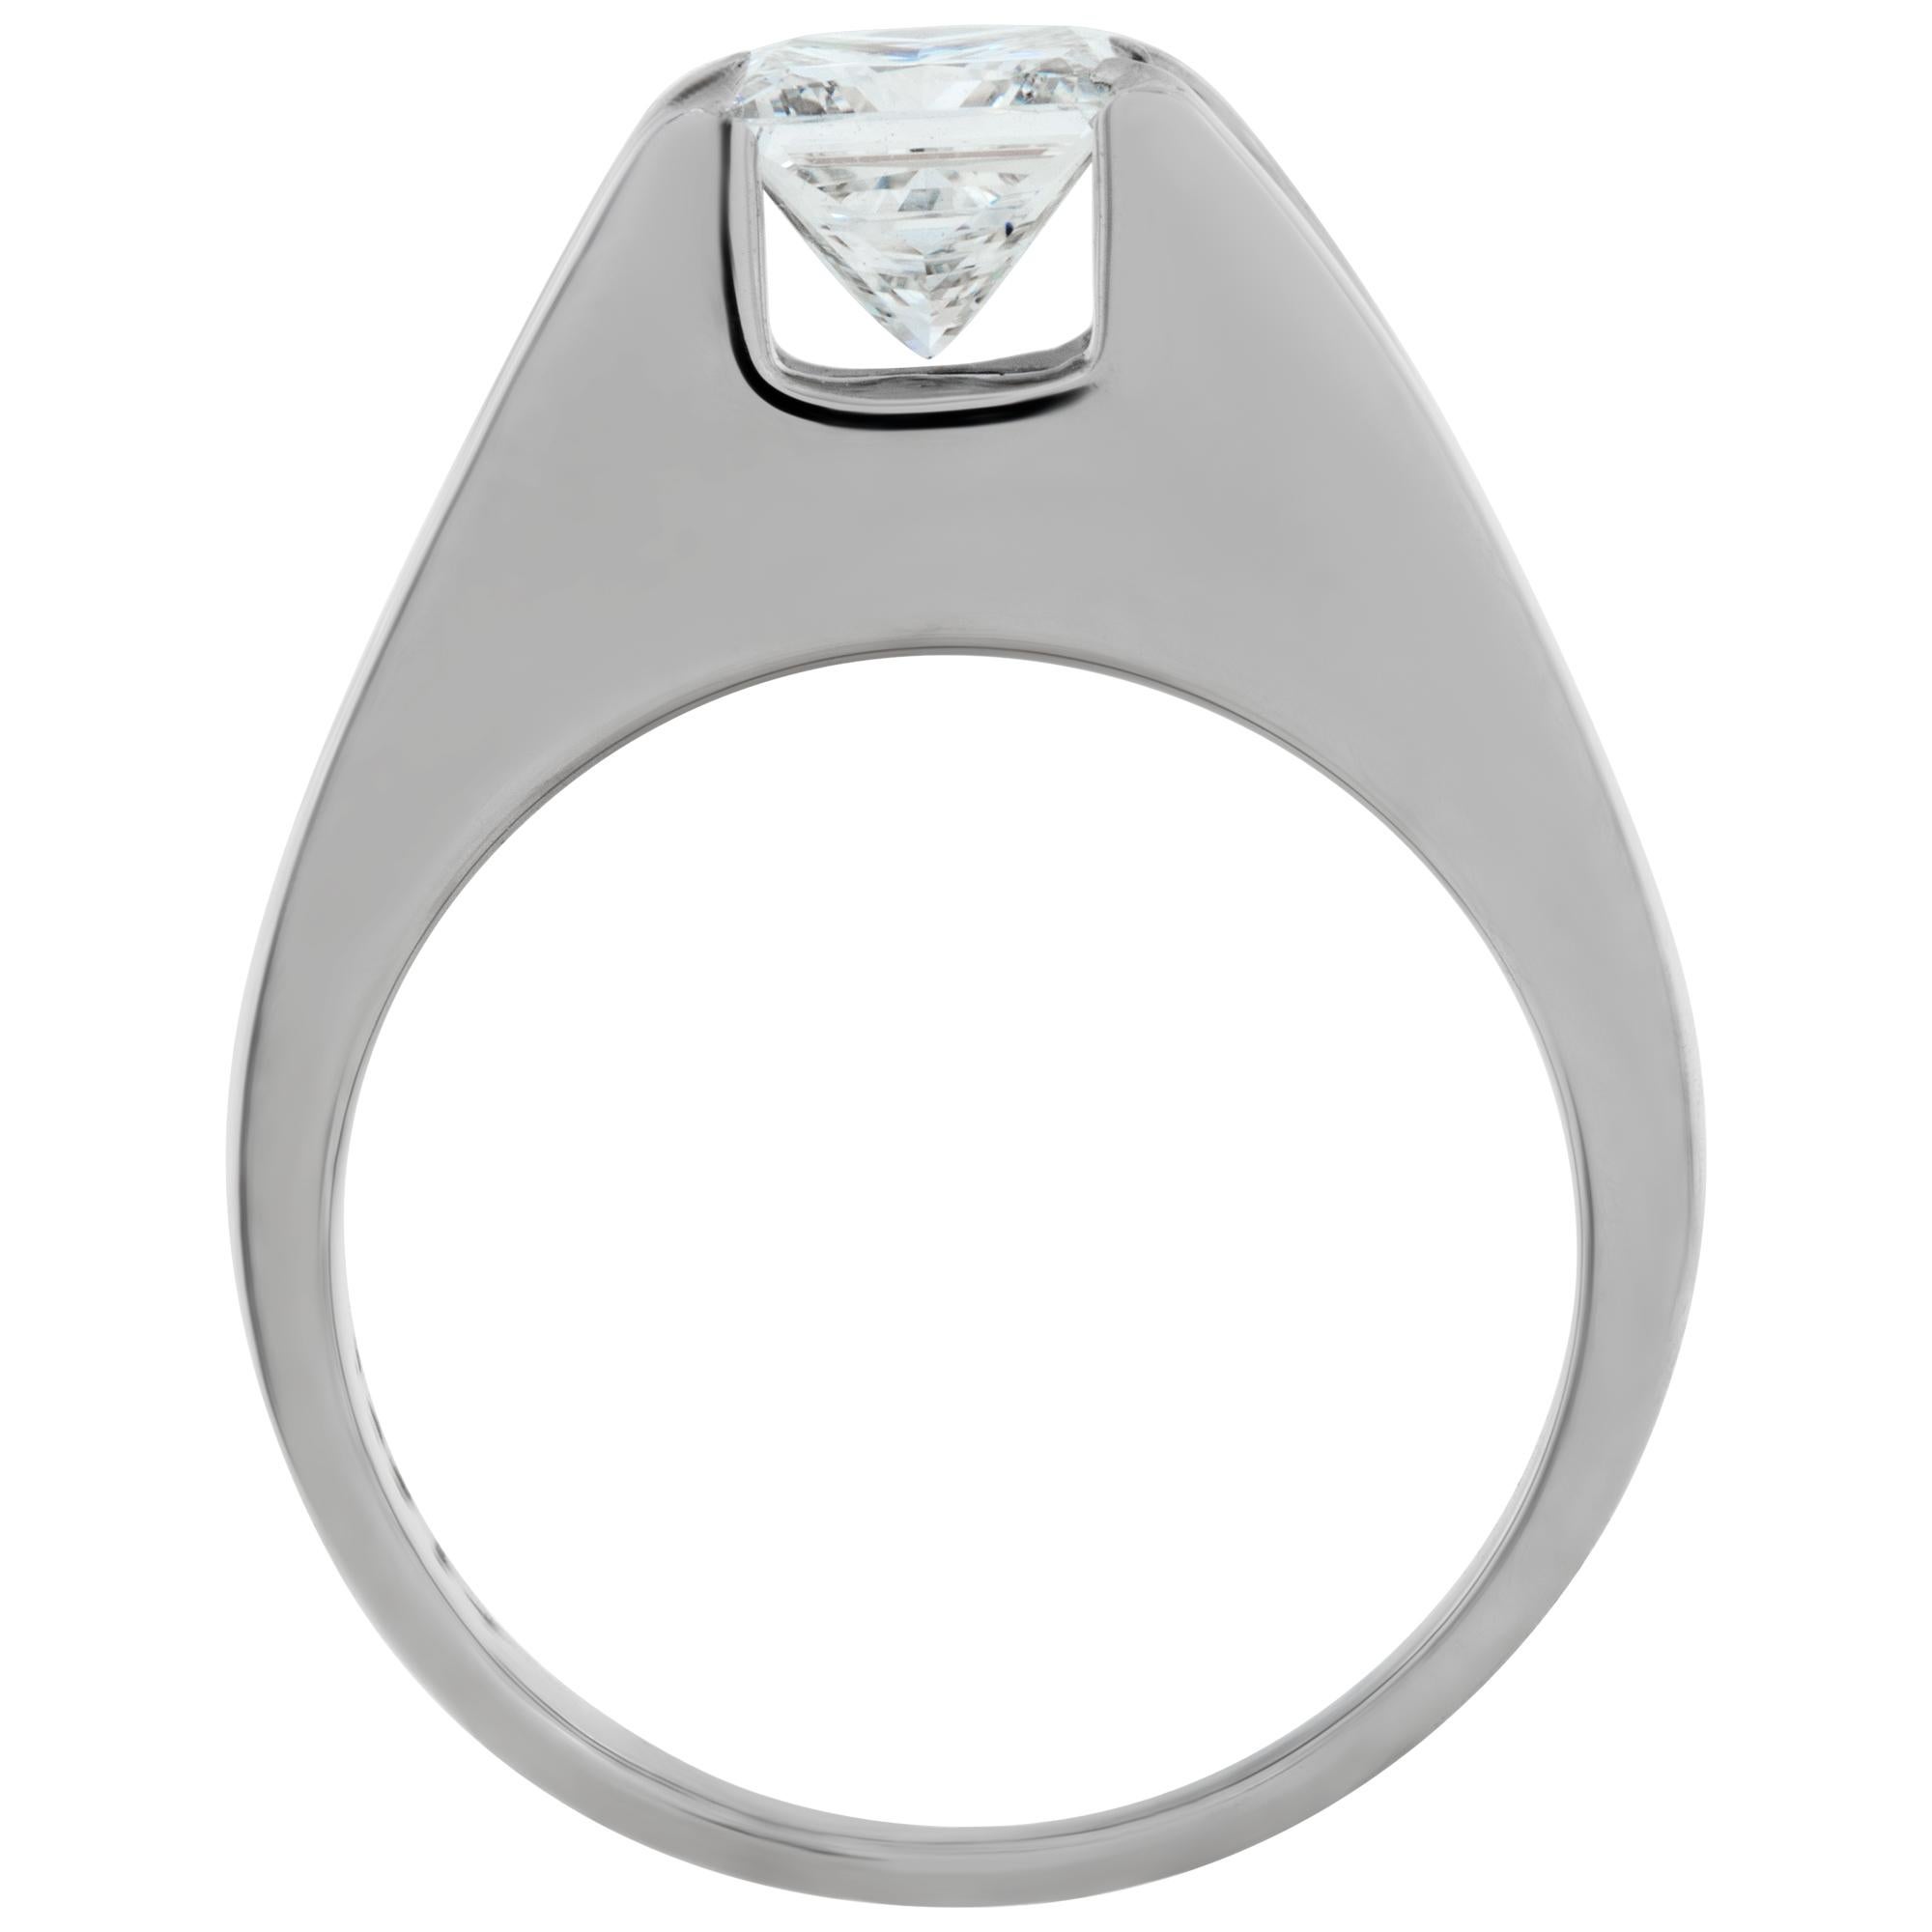 GIA Certified Princess Cut Diamond 1.01 Cts 'H Color, VS2 Clarity' Ring In Excellent Condition For Sale In Surfside, FL